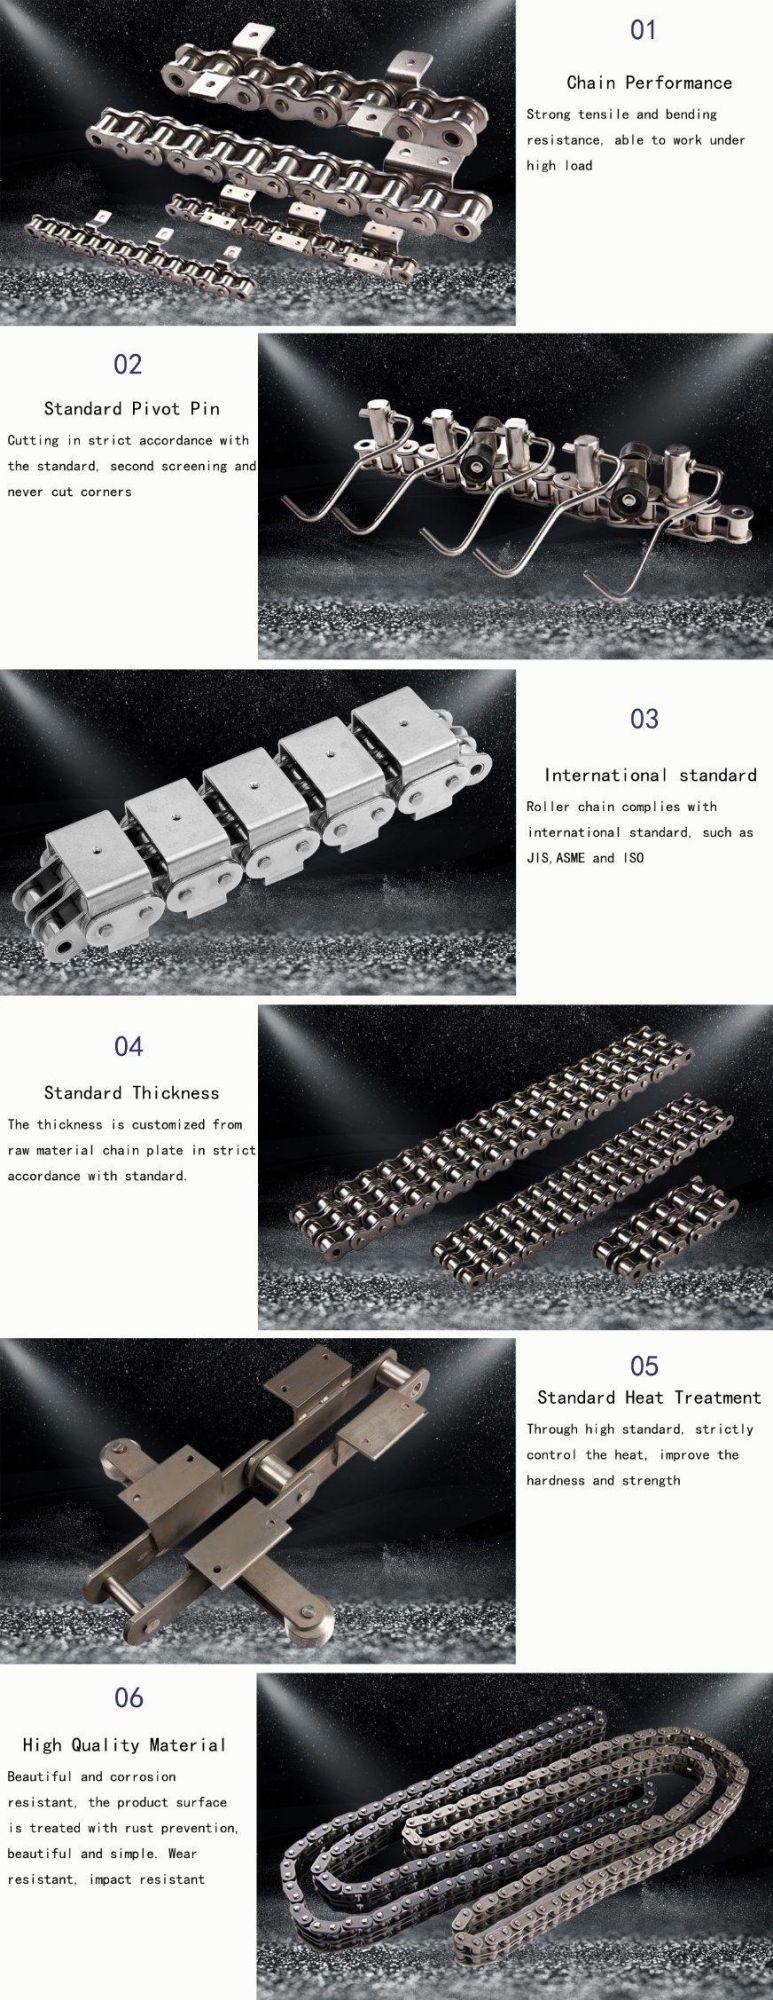 Power Transmission Industrial Conveyor Roller Chain with Special Extended Pins